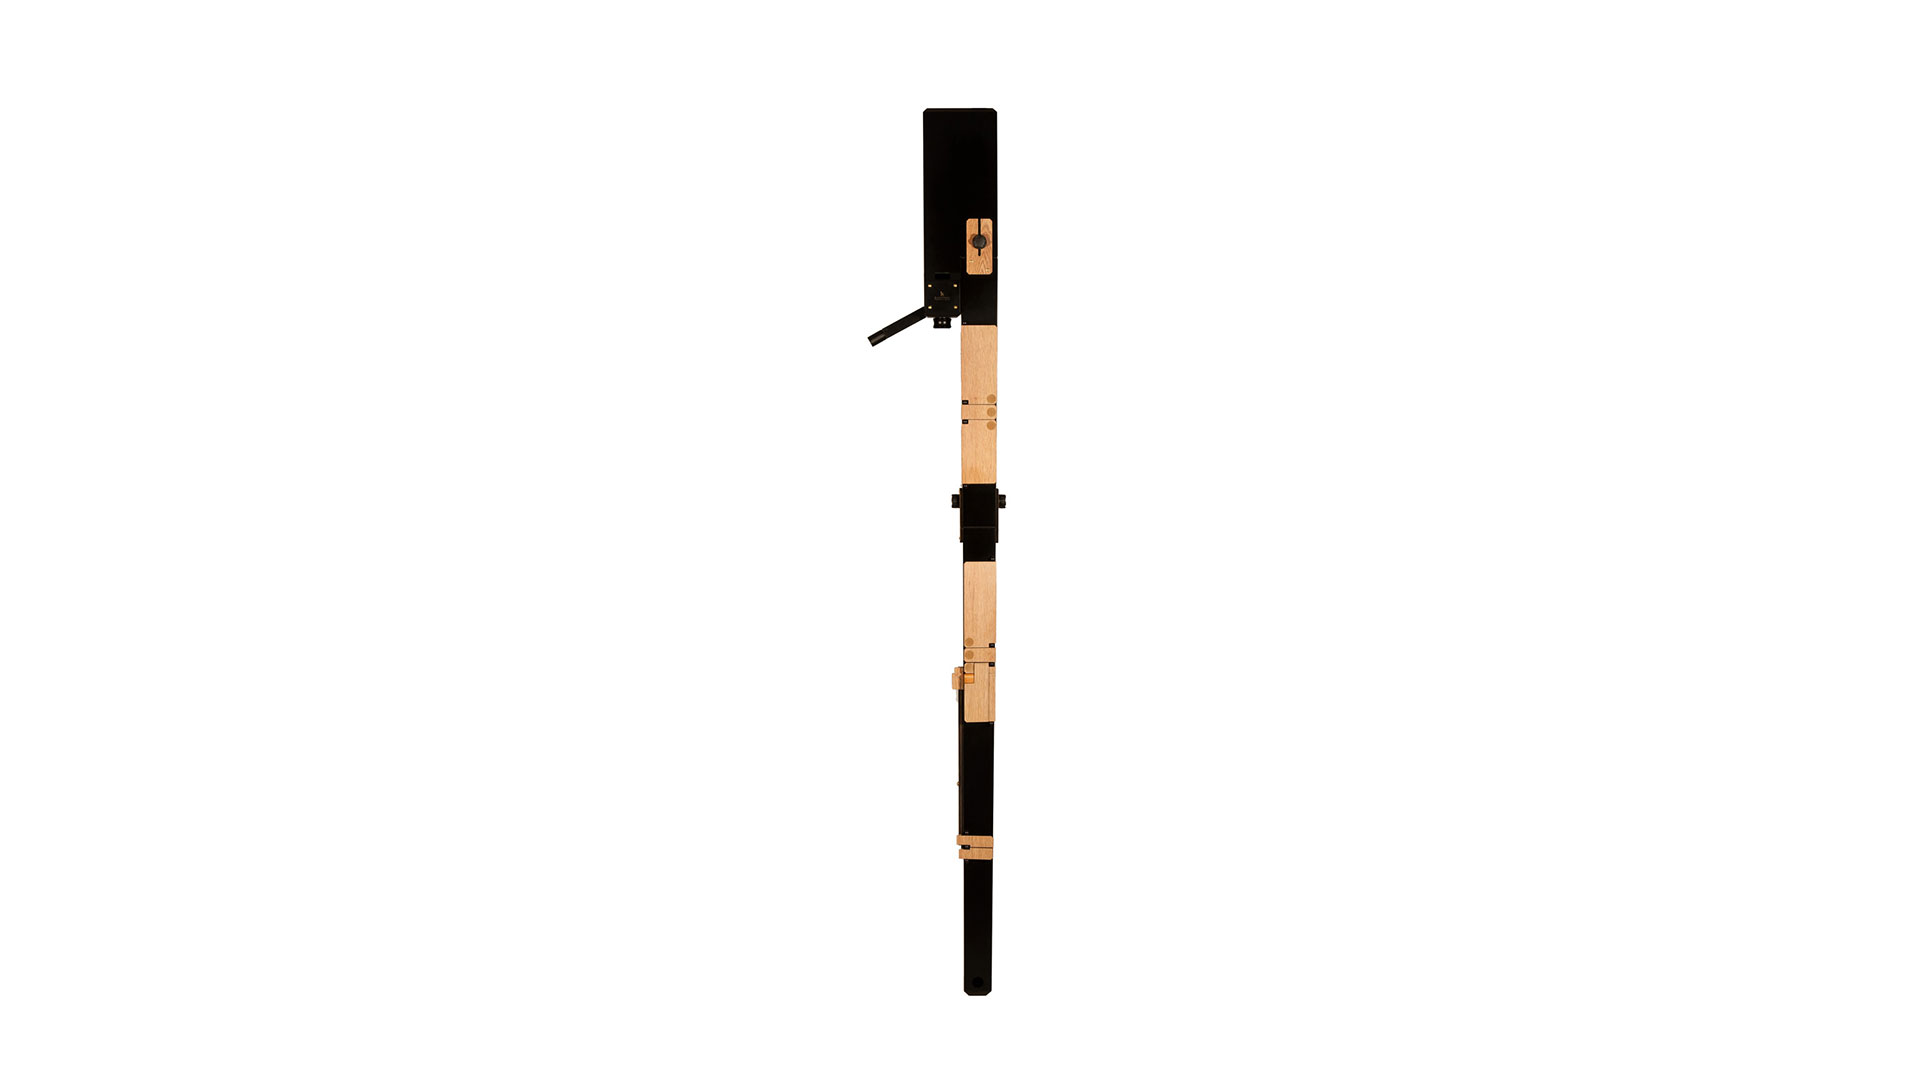 Paetzold by Kunath, "Solo", "HP Original" sub great bass recorder in c, 442 Hz, RESONA synthetic material